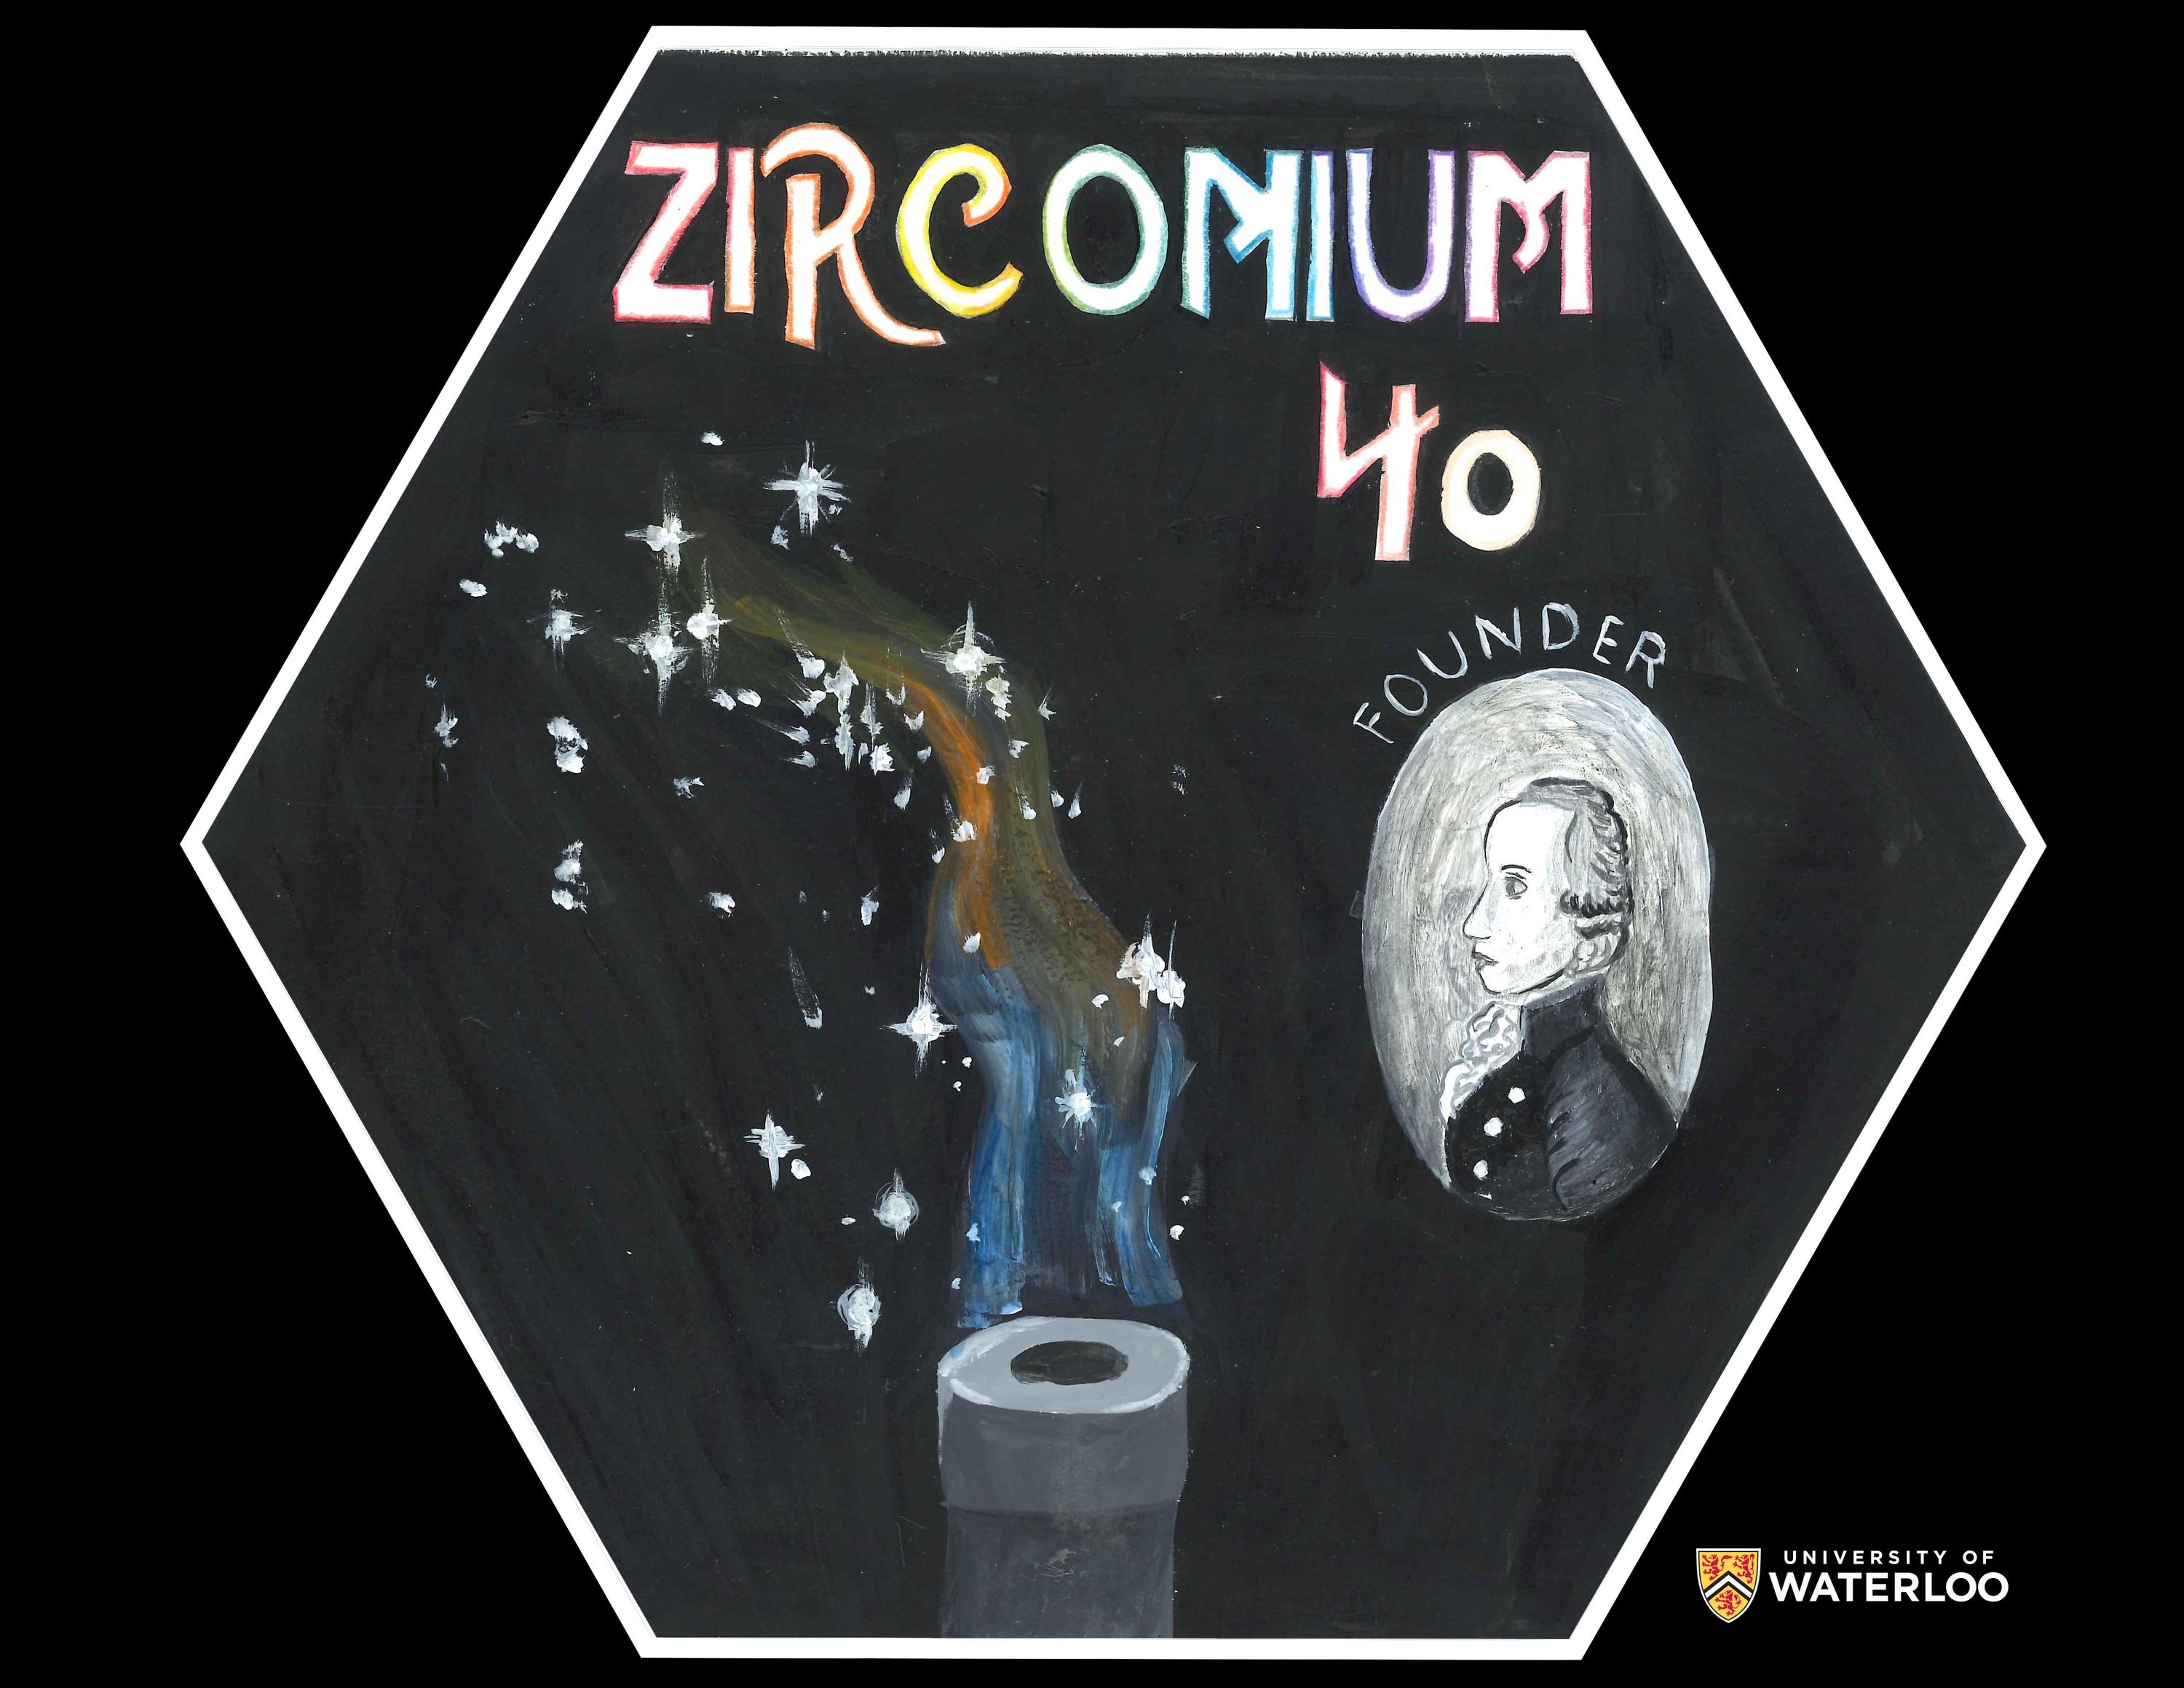 Acrylic on black background. “Zirconium 40” appears at the top with letters outlined in different colours. Portrait of “Founder” Martin Heinrich Klaproth appears right. Left is a foundry stack emitting silvery particles and colored flames.